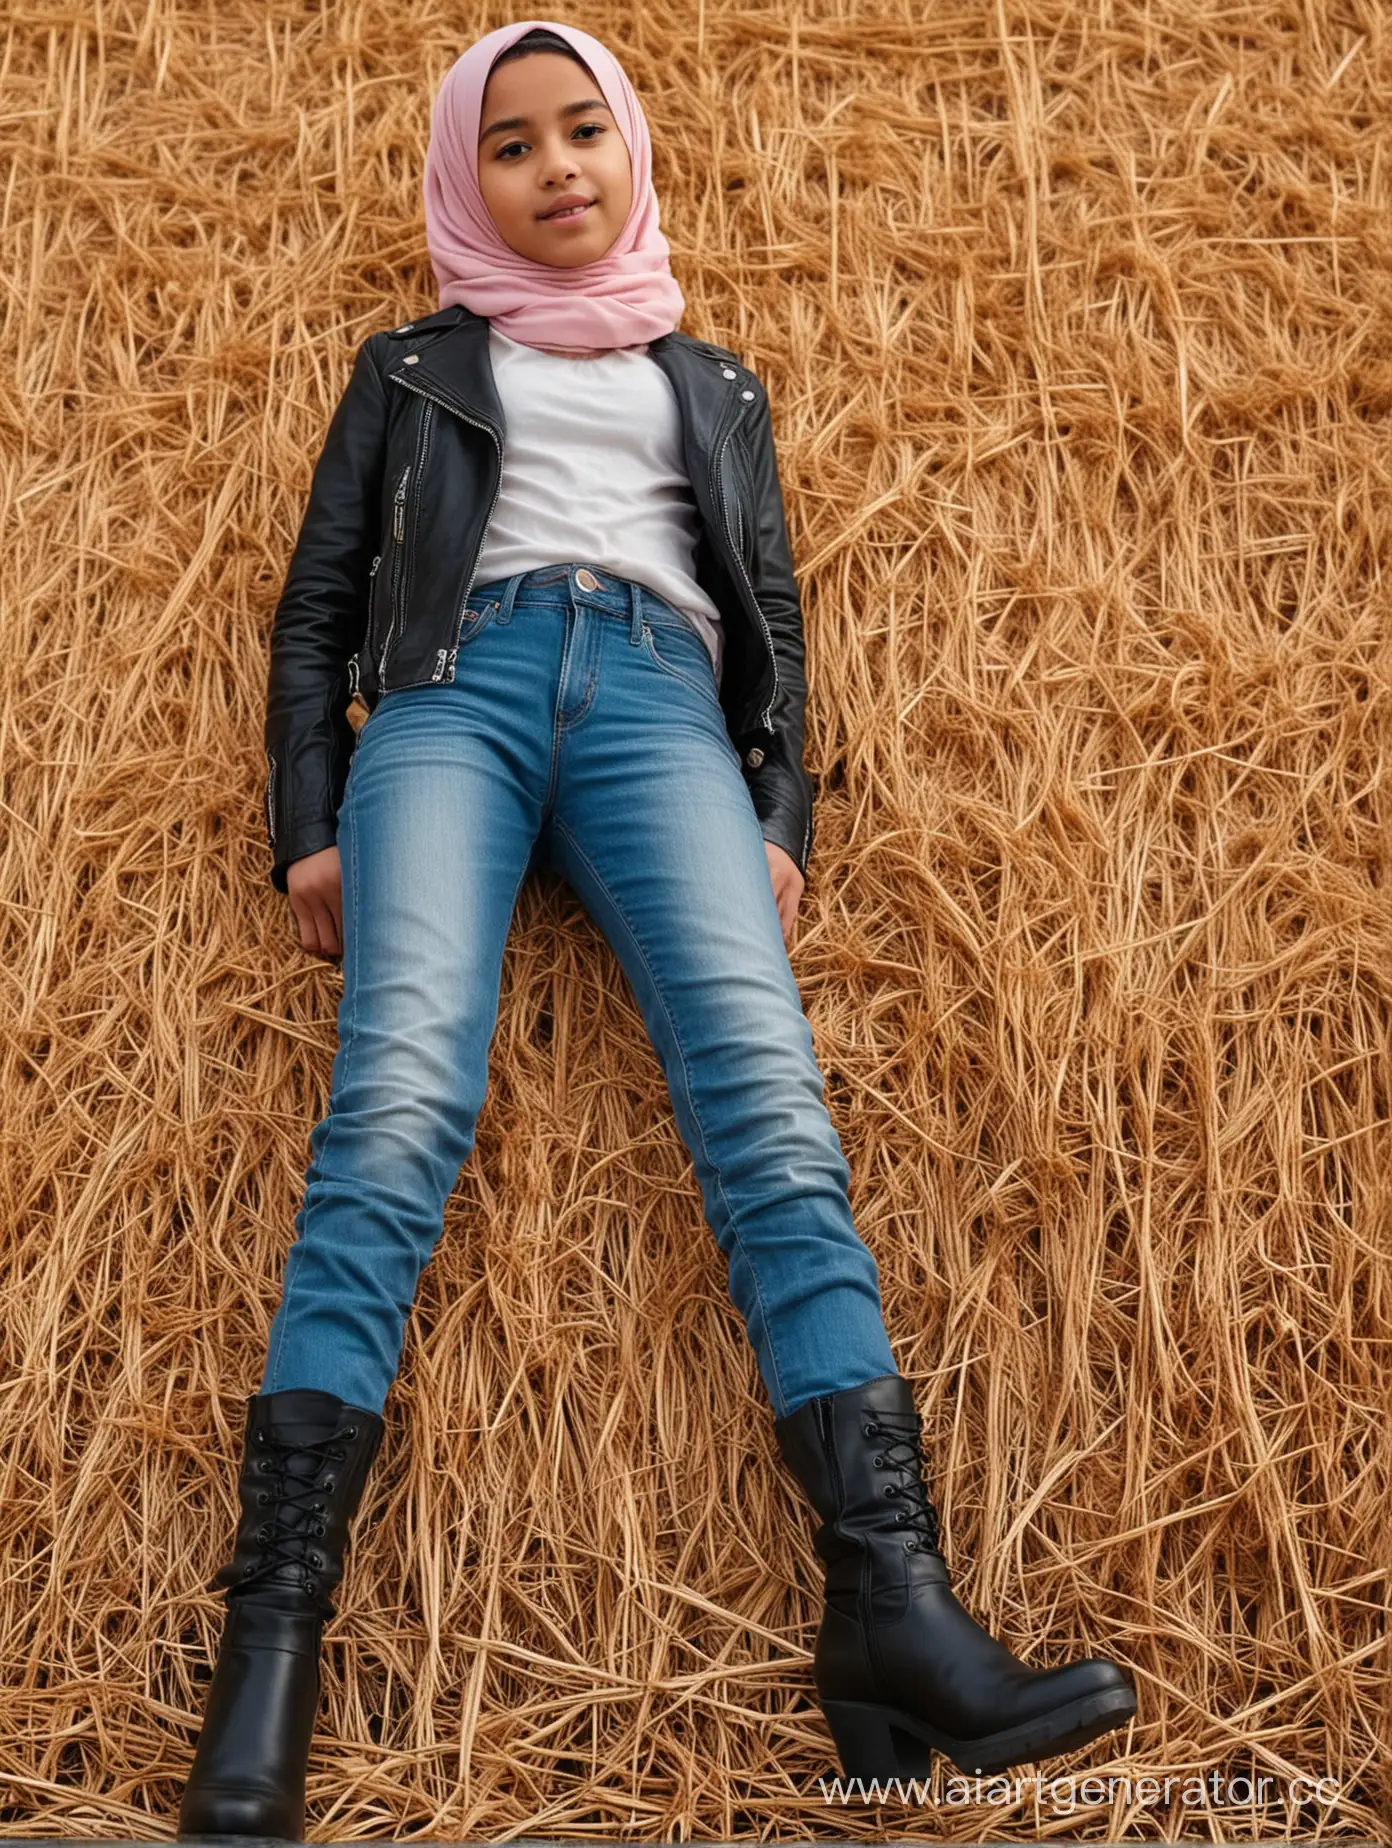 12YearOld-British-Girl-in-Hijab-with-Casual-Chic-Outfit-Posed-Amid-Hay-Bales